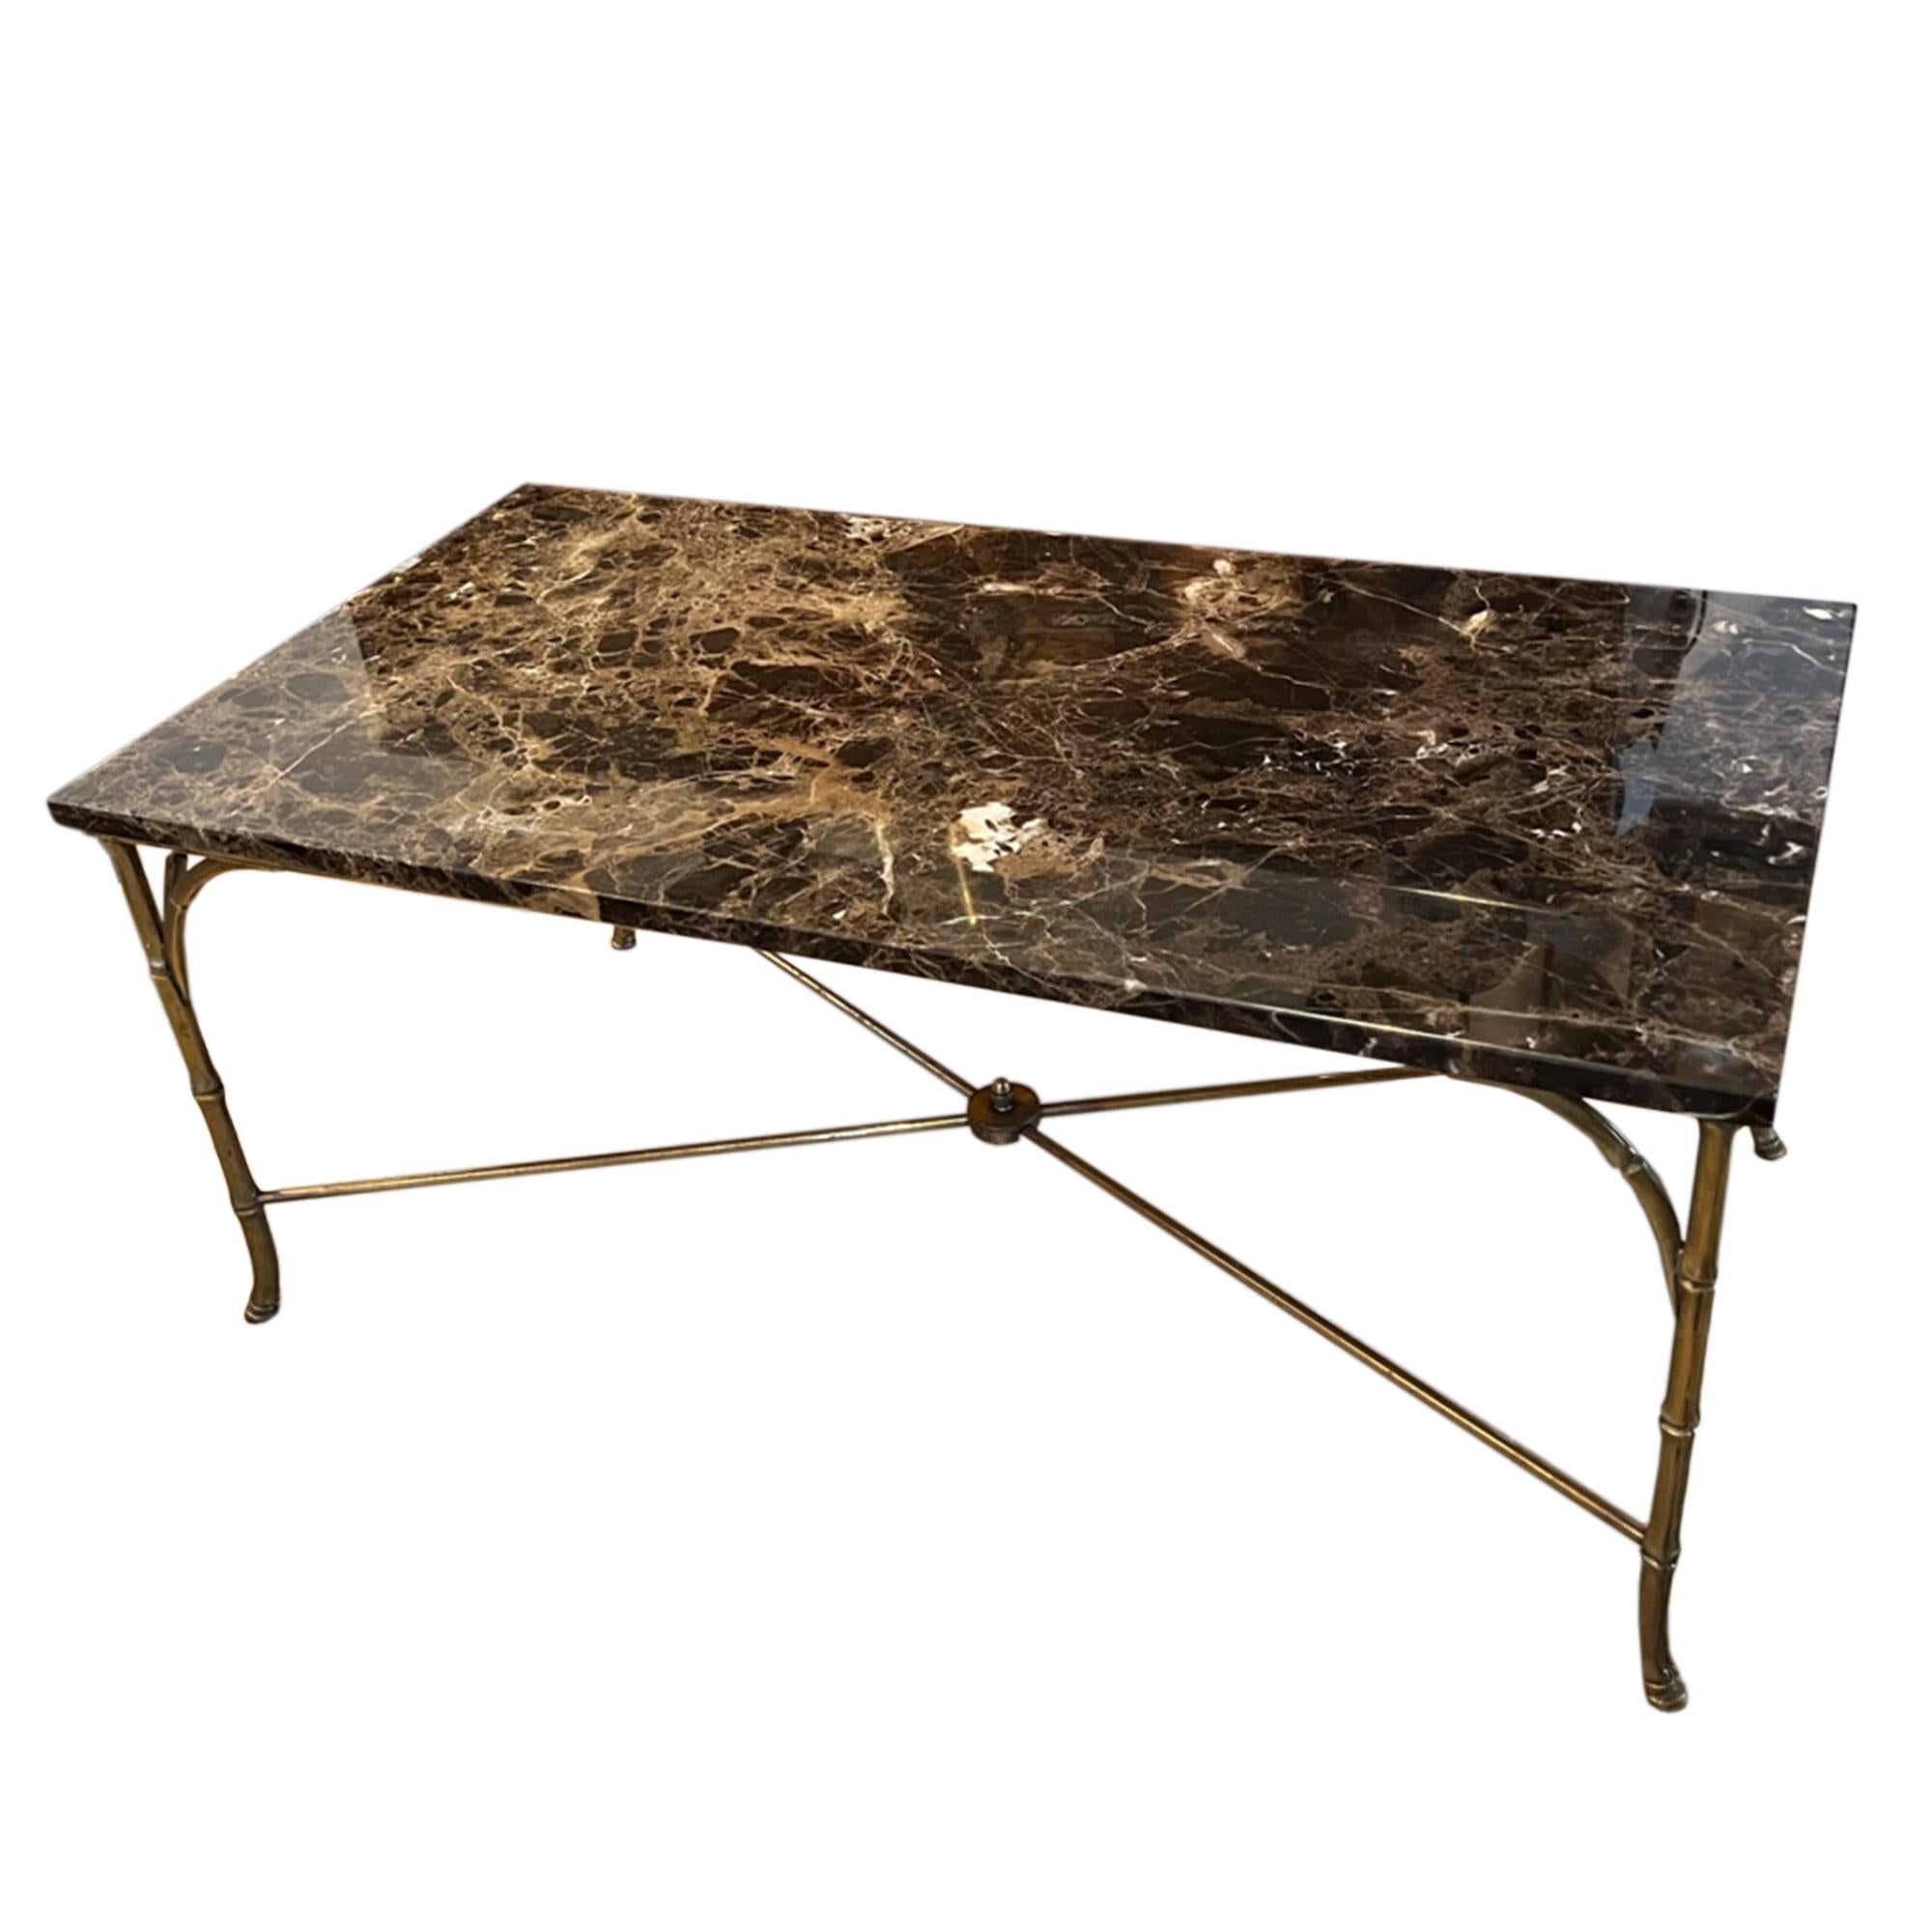 This is a lovely 1960s coffee table. The beautiful marble top is supported by a brass faux bamboo frame.

Elegant, mid century design.

Made in France.